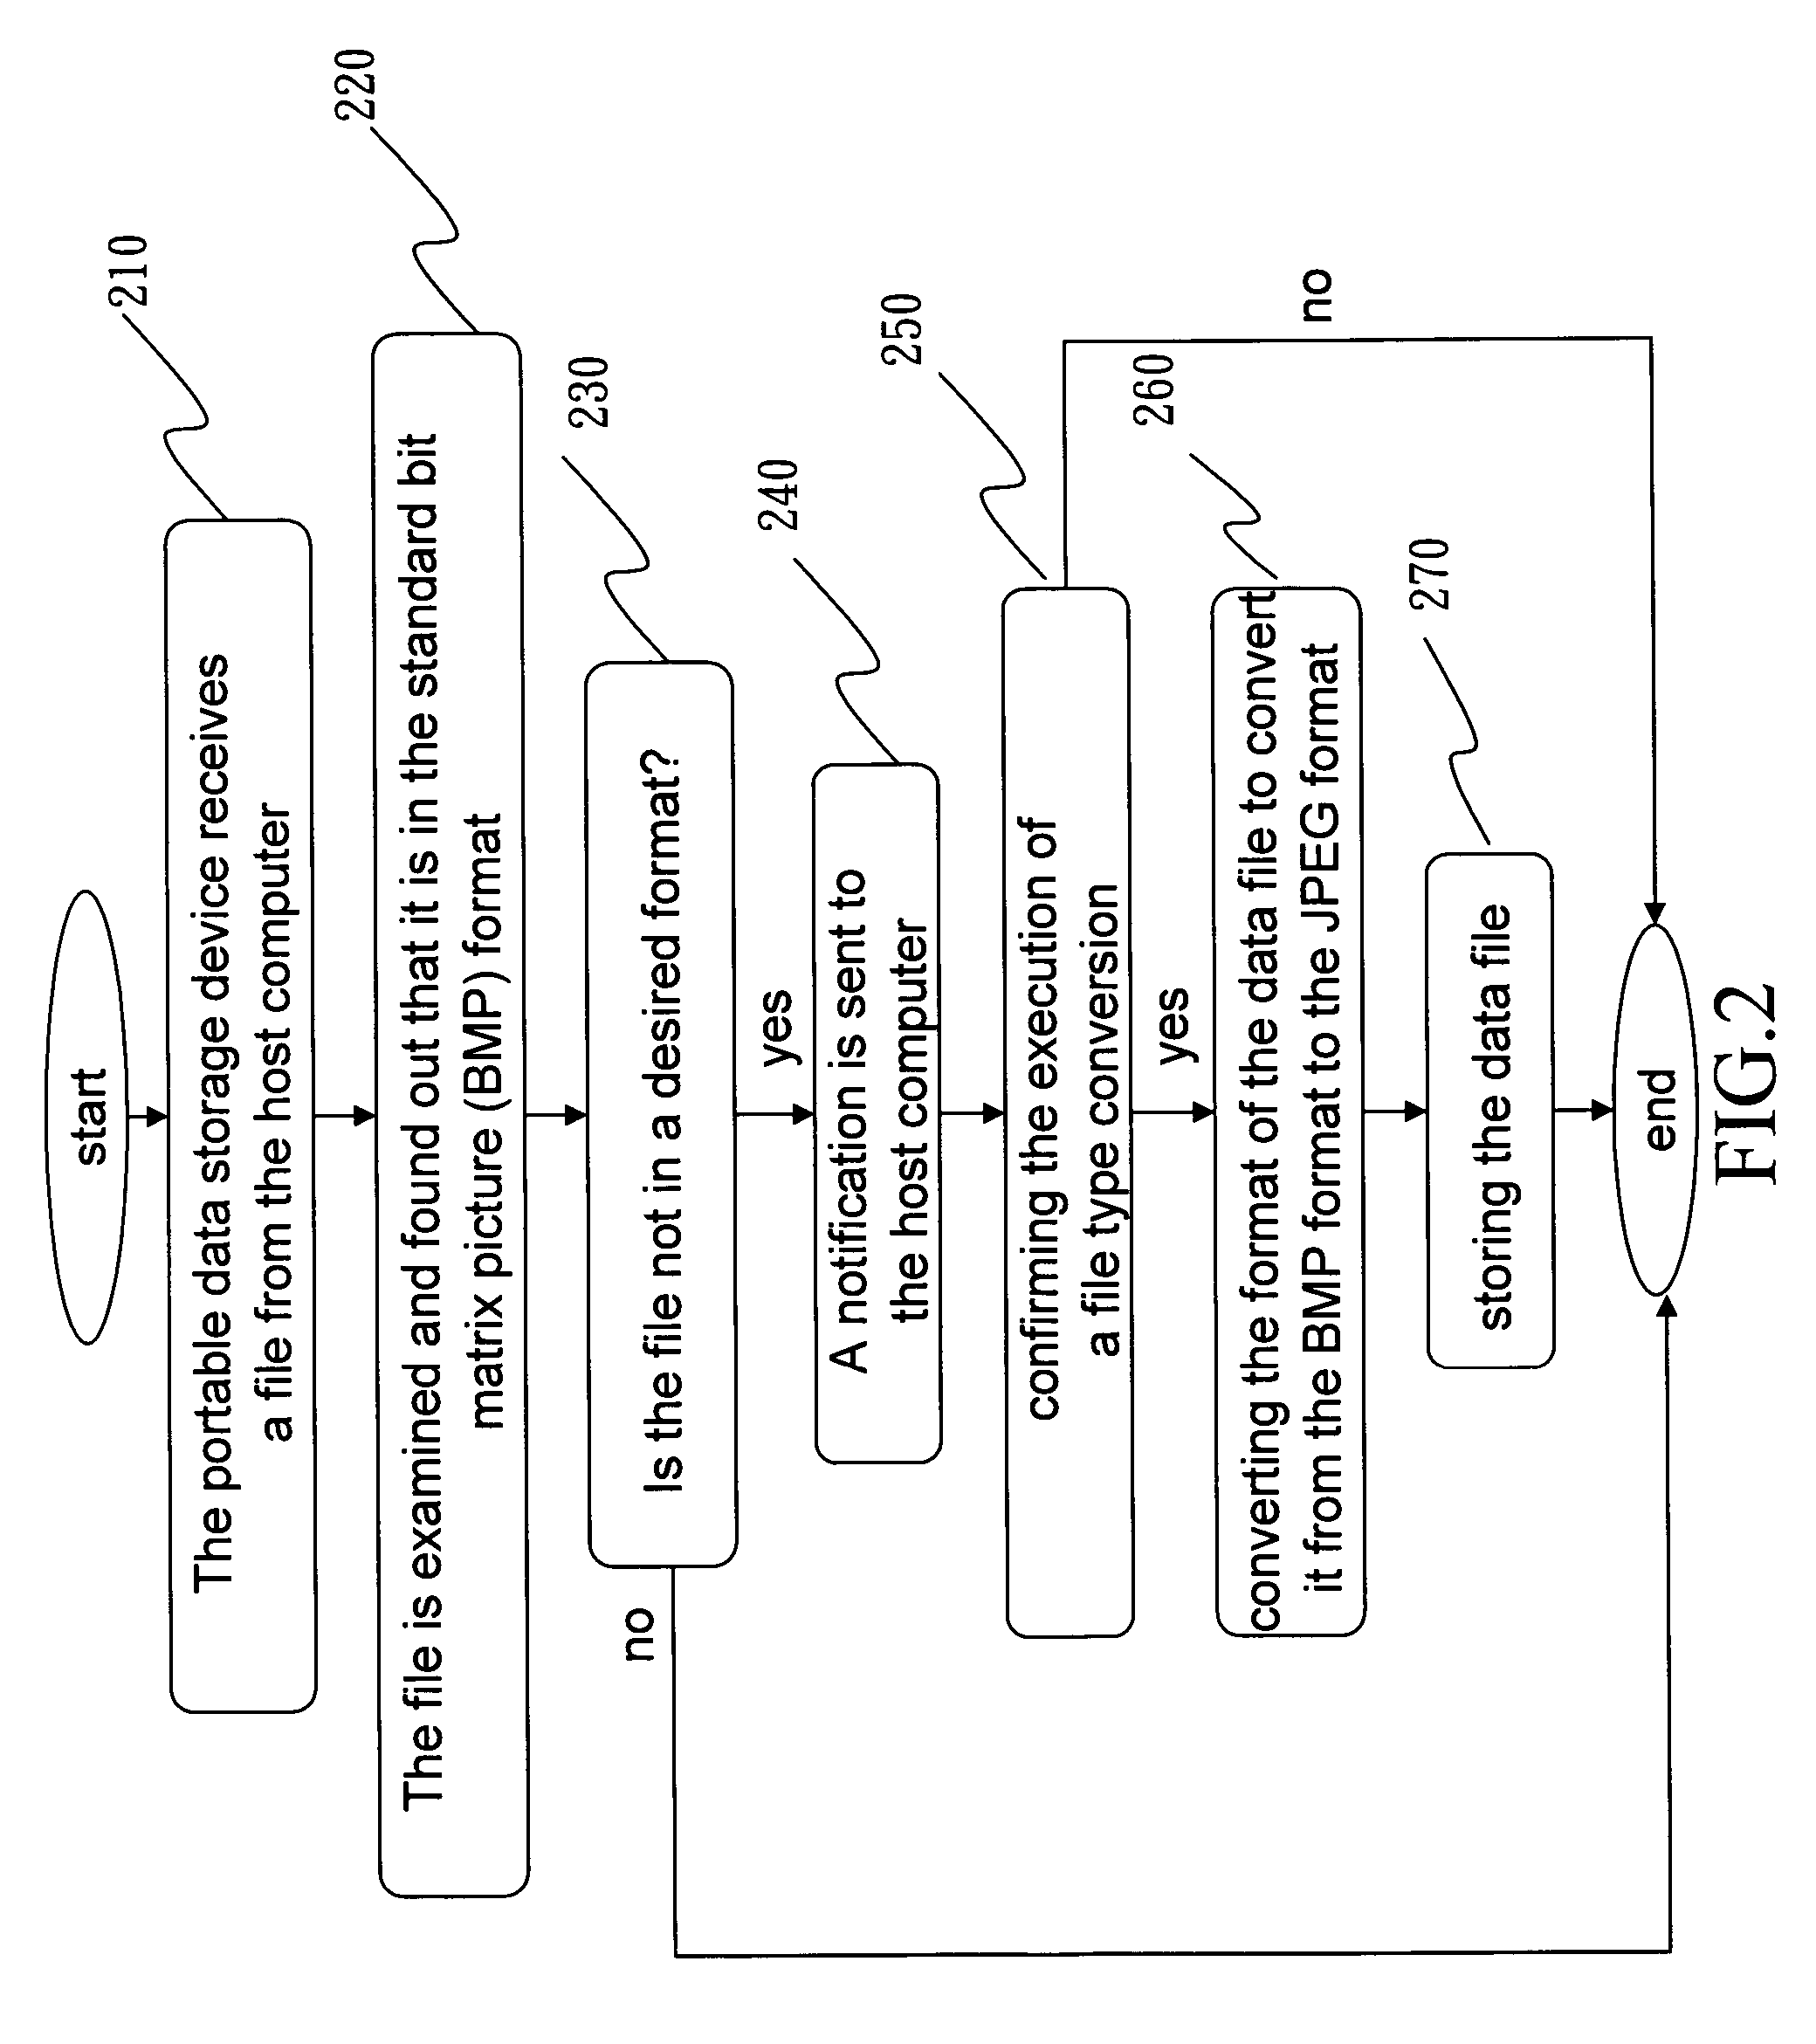 Portable data storage device that converts data types and data type converting method